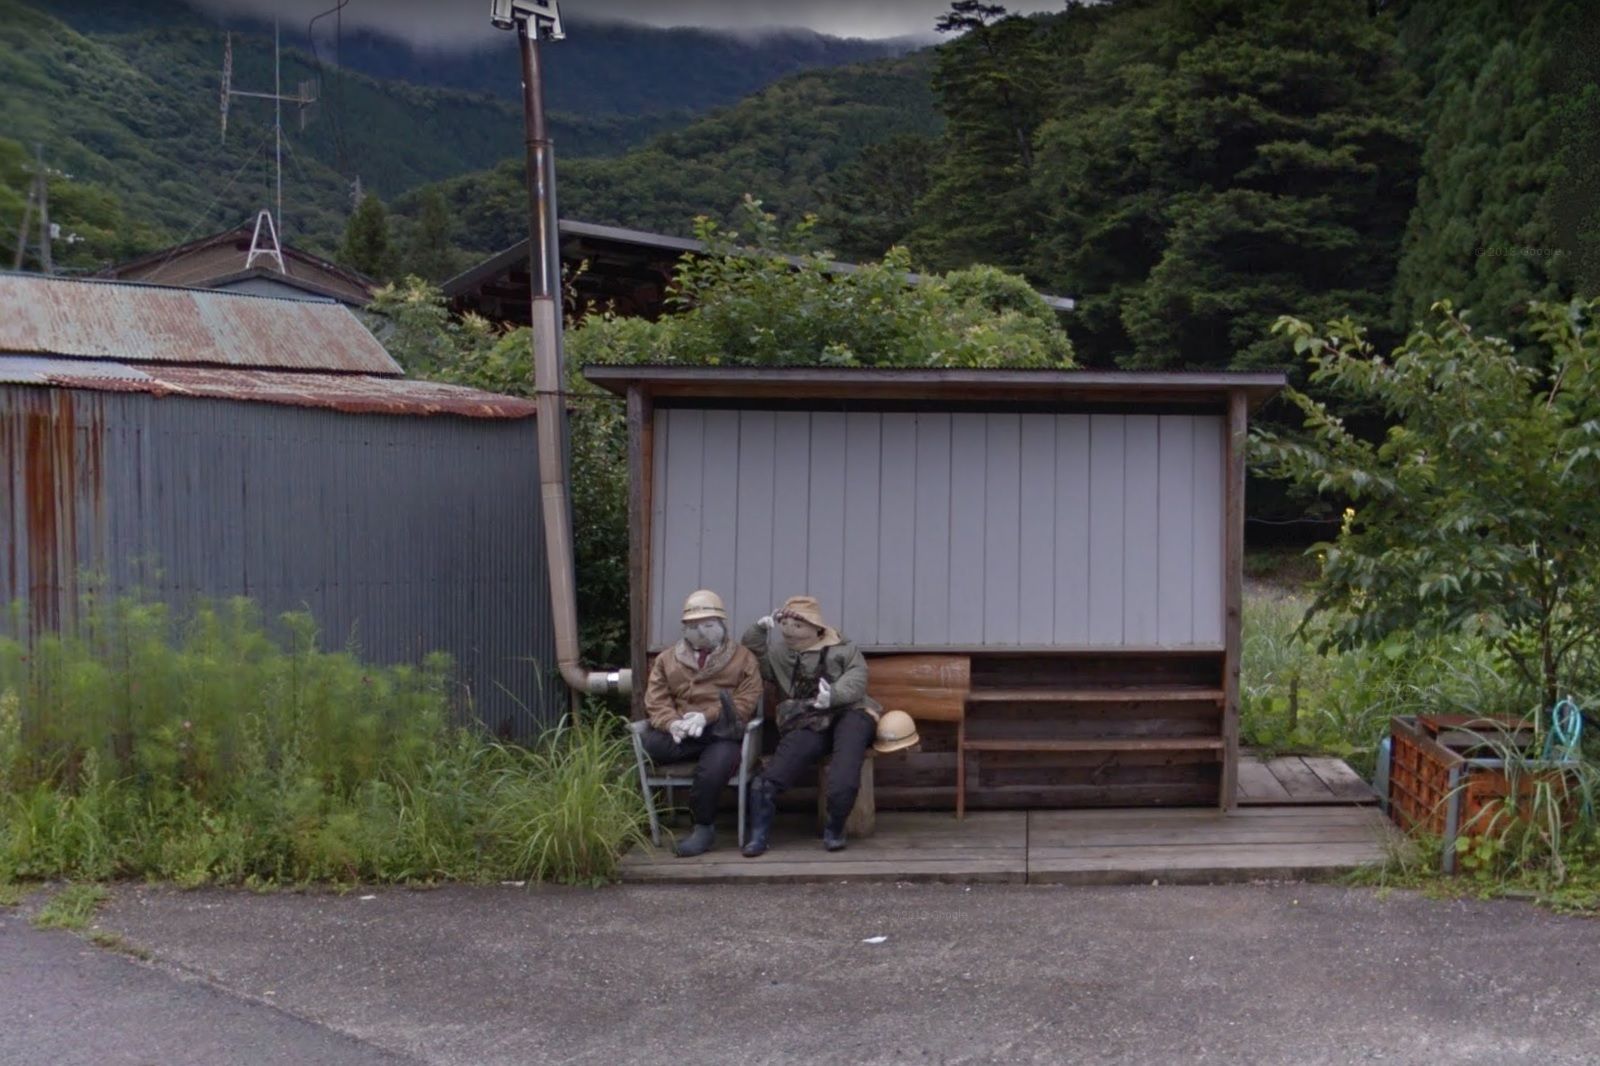 Brilliant views from around the world captured by Street View image 14